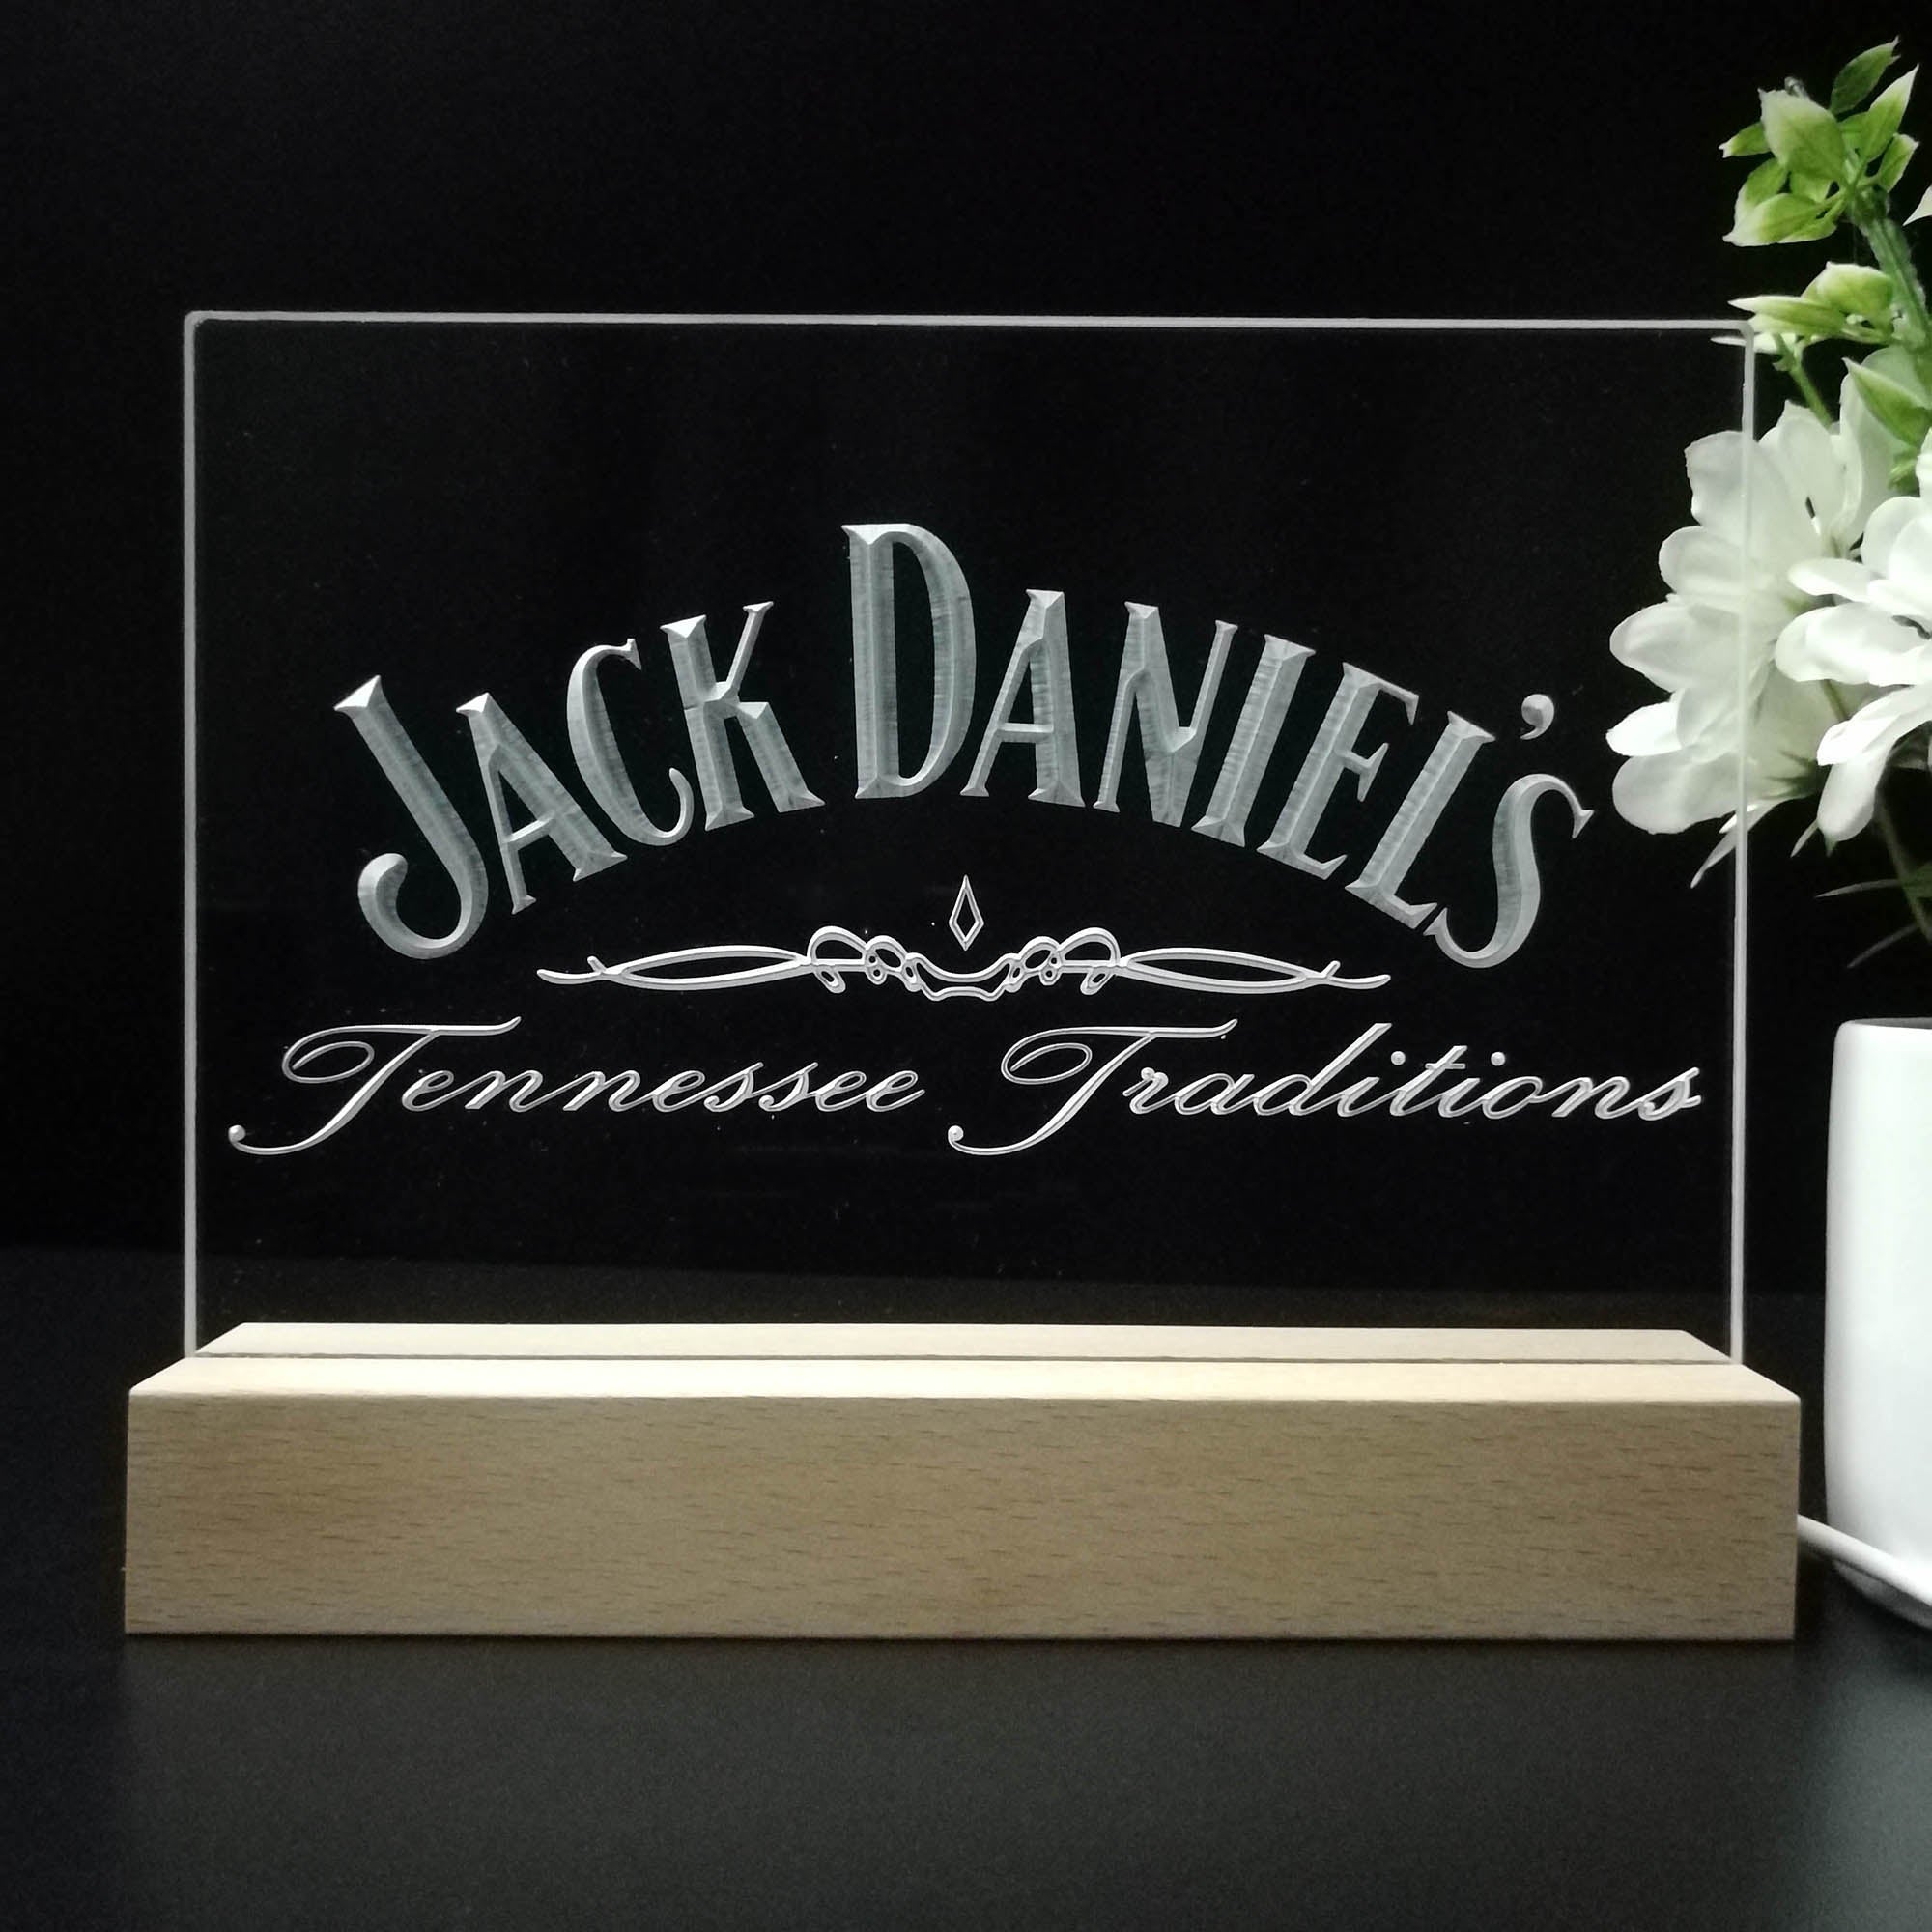 Jack Daniel's Tennessee Traditions Neon Sign Pub Bar Lamp